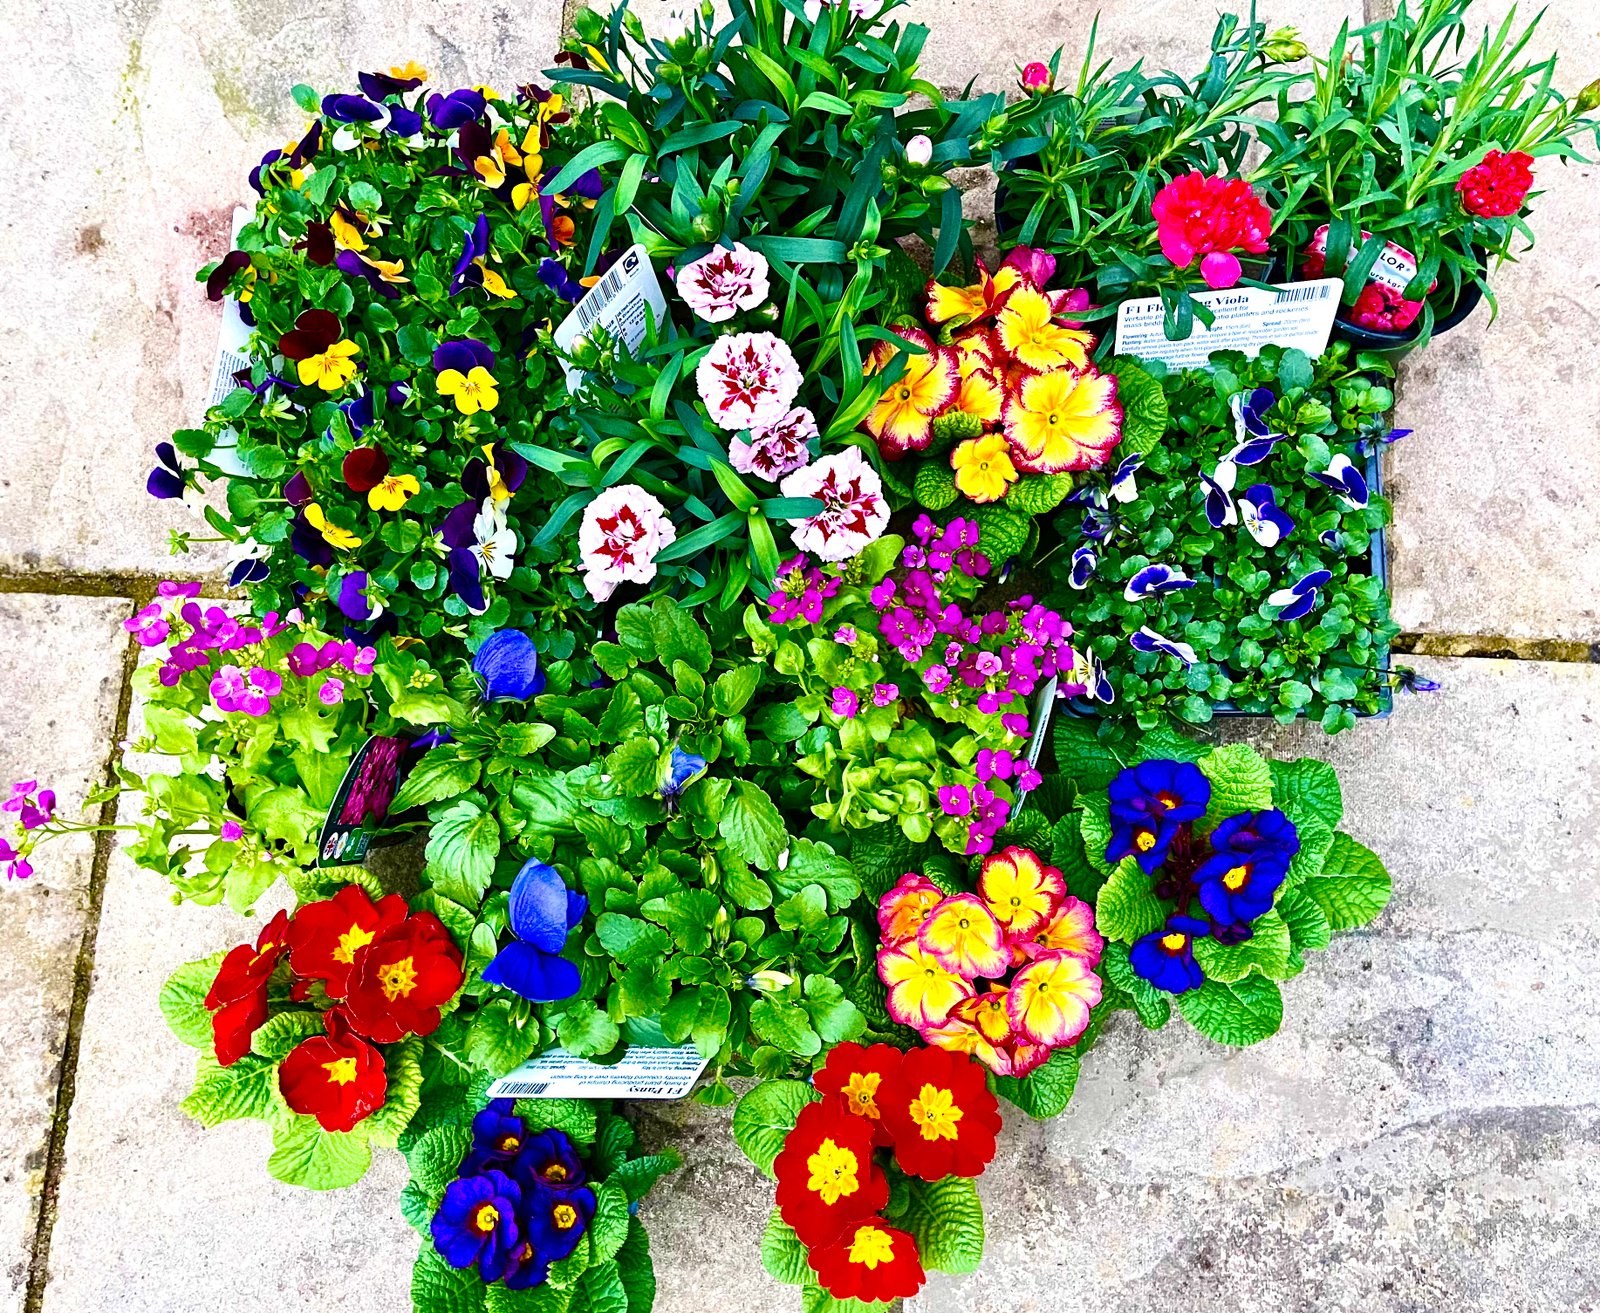 Colourful perennial flowers The Thrifty Island Girl Lei Hang has picked up from the garden center. Perennial plants grow back every year